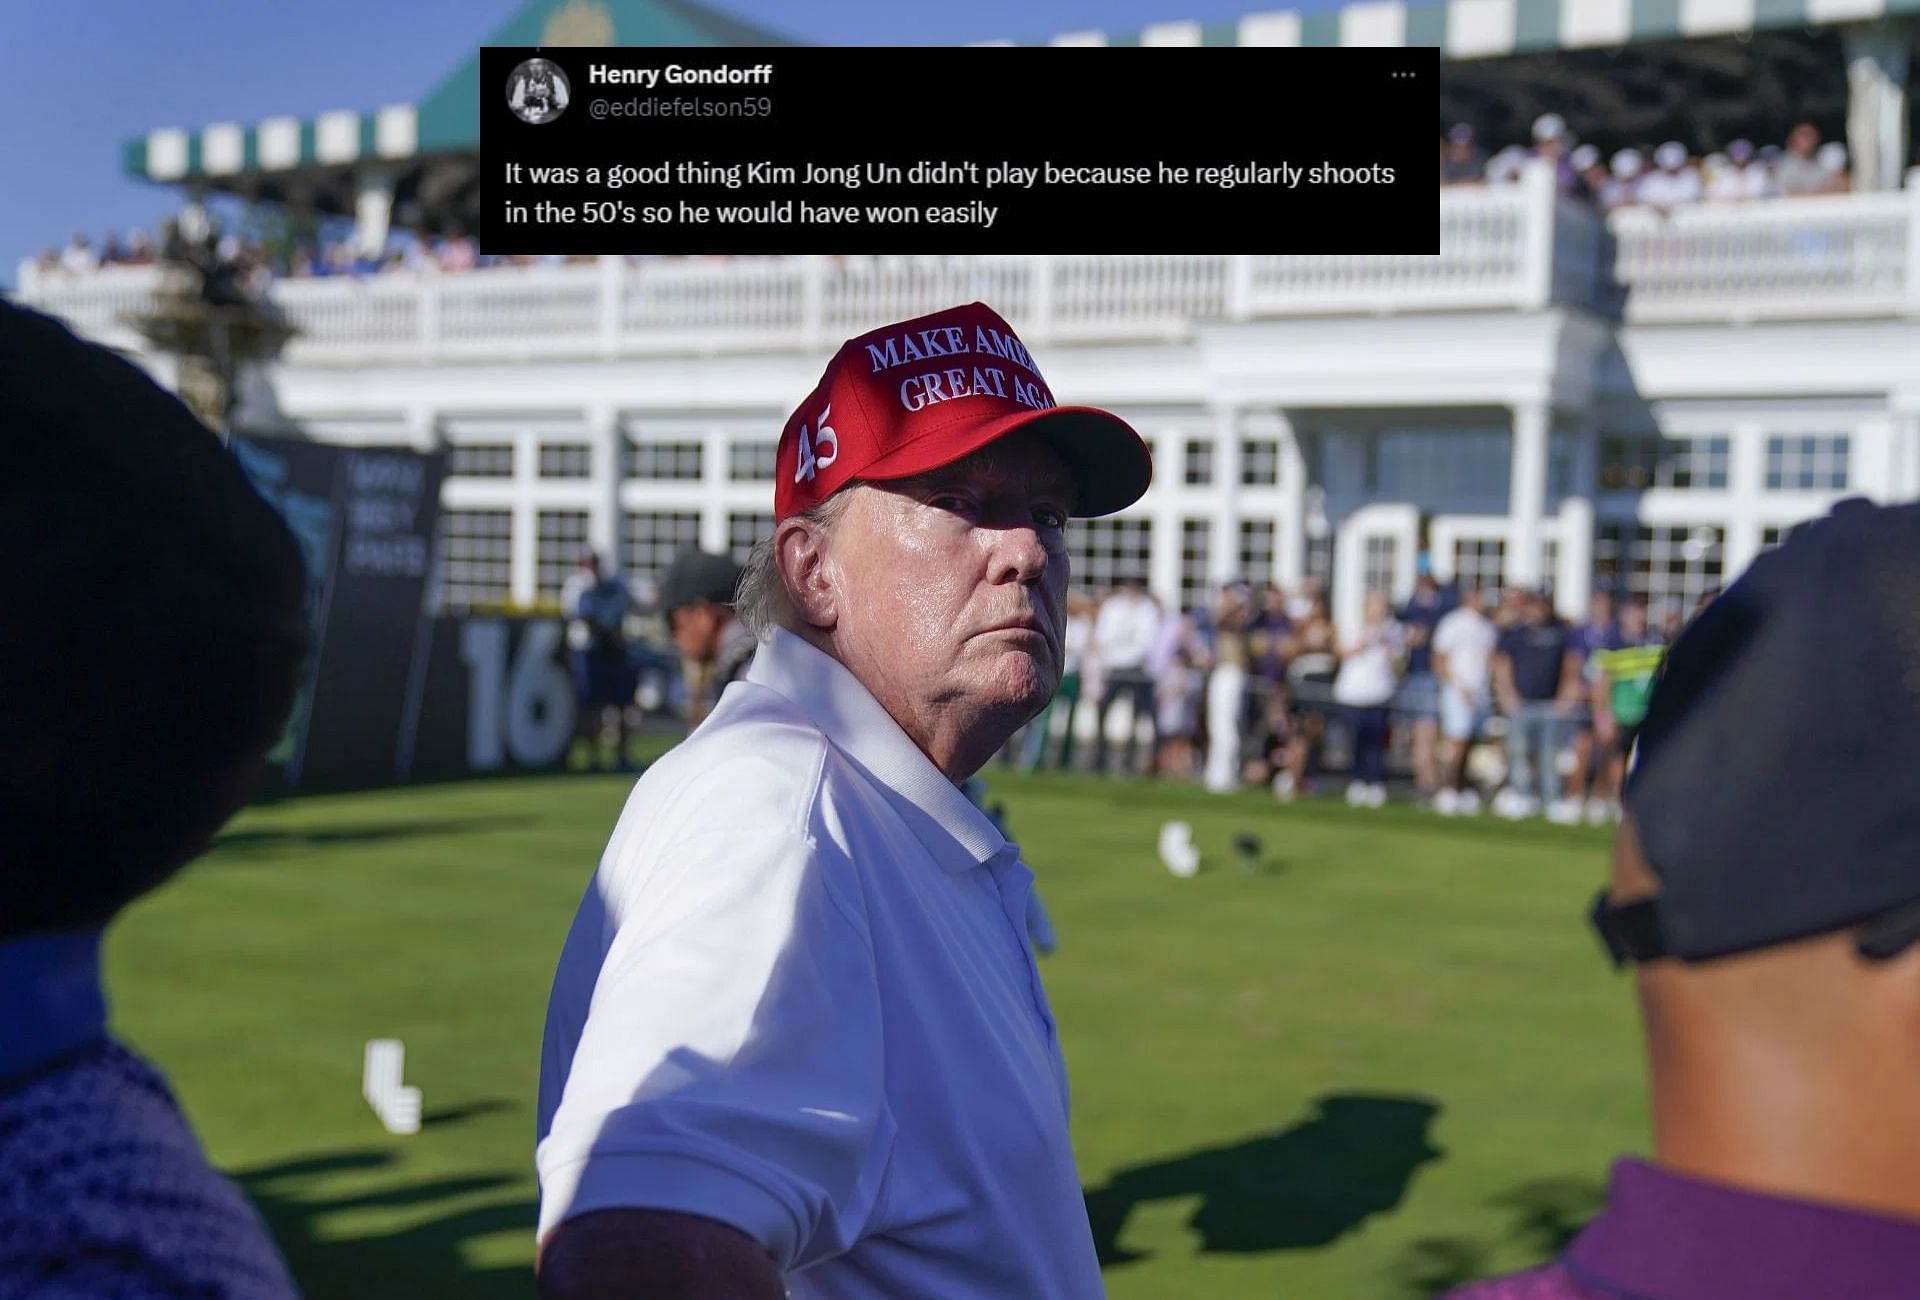 Donald Trump at the Trump National Golf Club at Bedminster, New Jersey (Image via Getty).